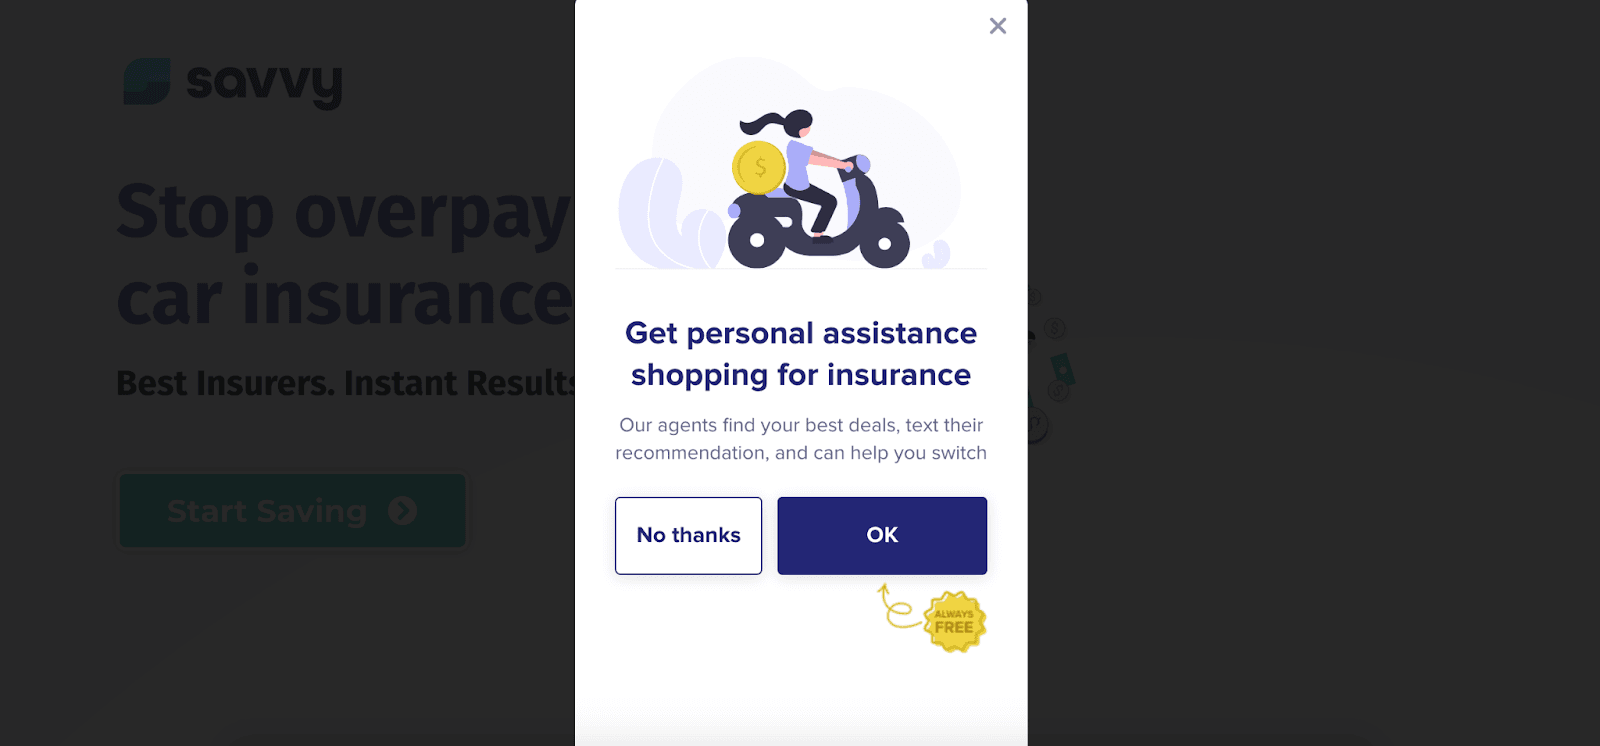 Savvy: My Experience Pricing Auto Insurance with Savvy - Text recommendations